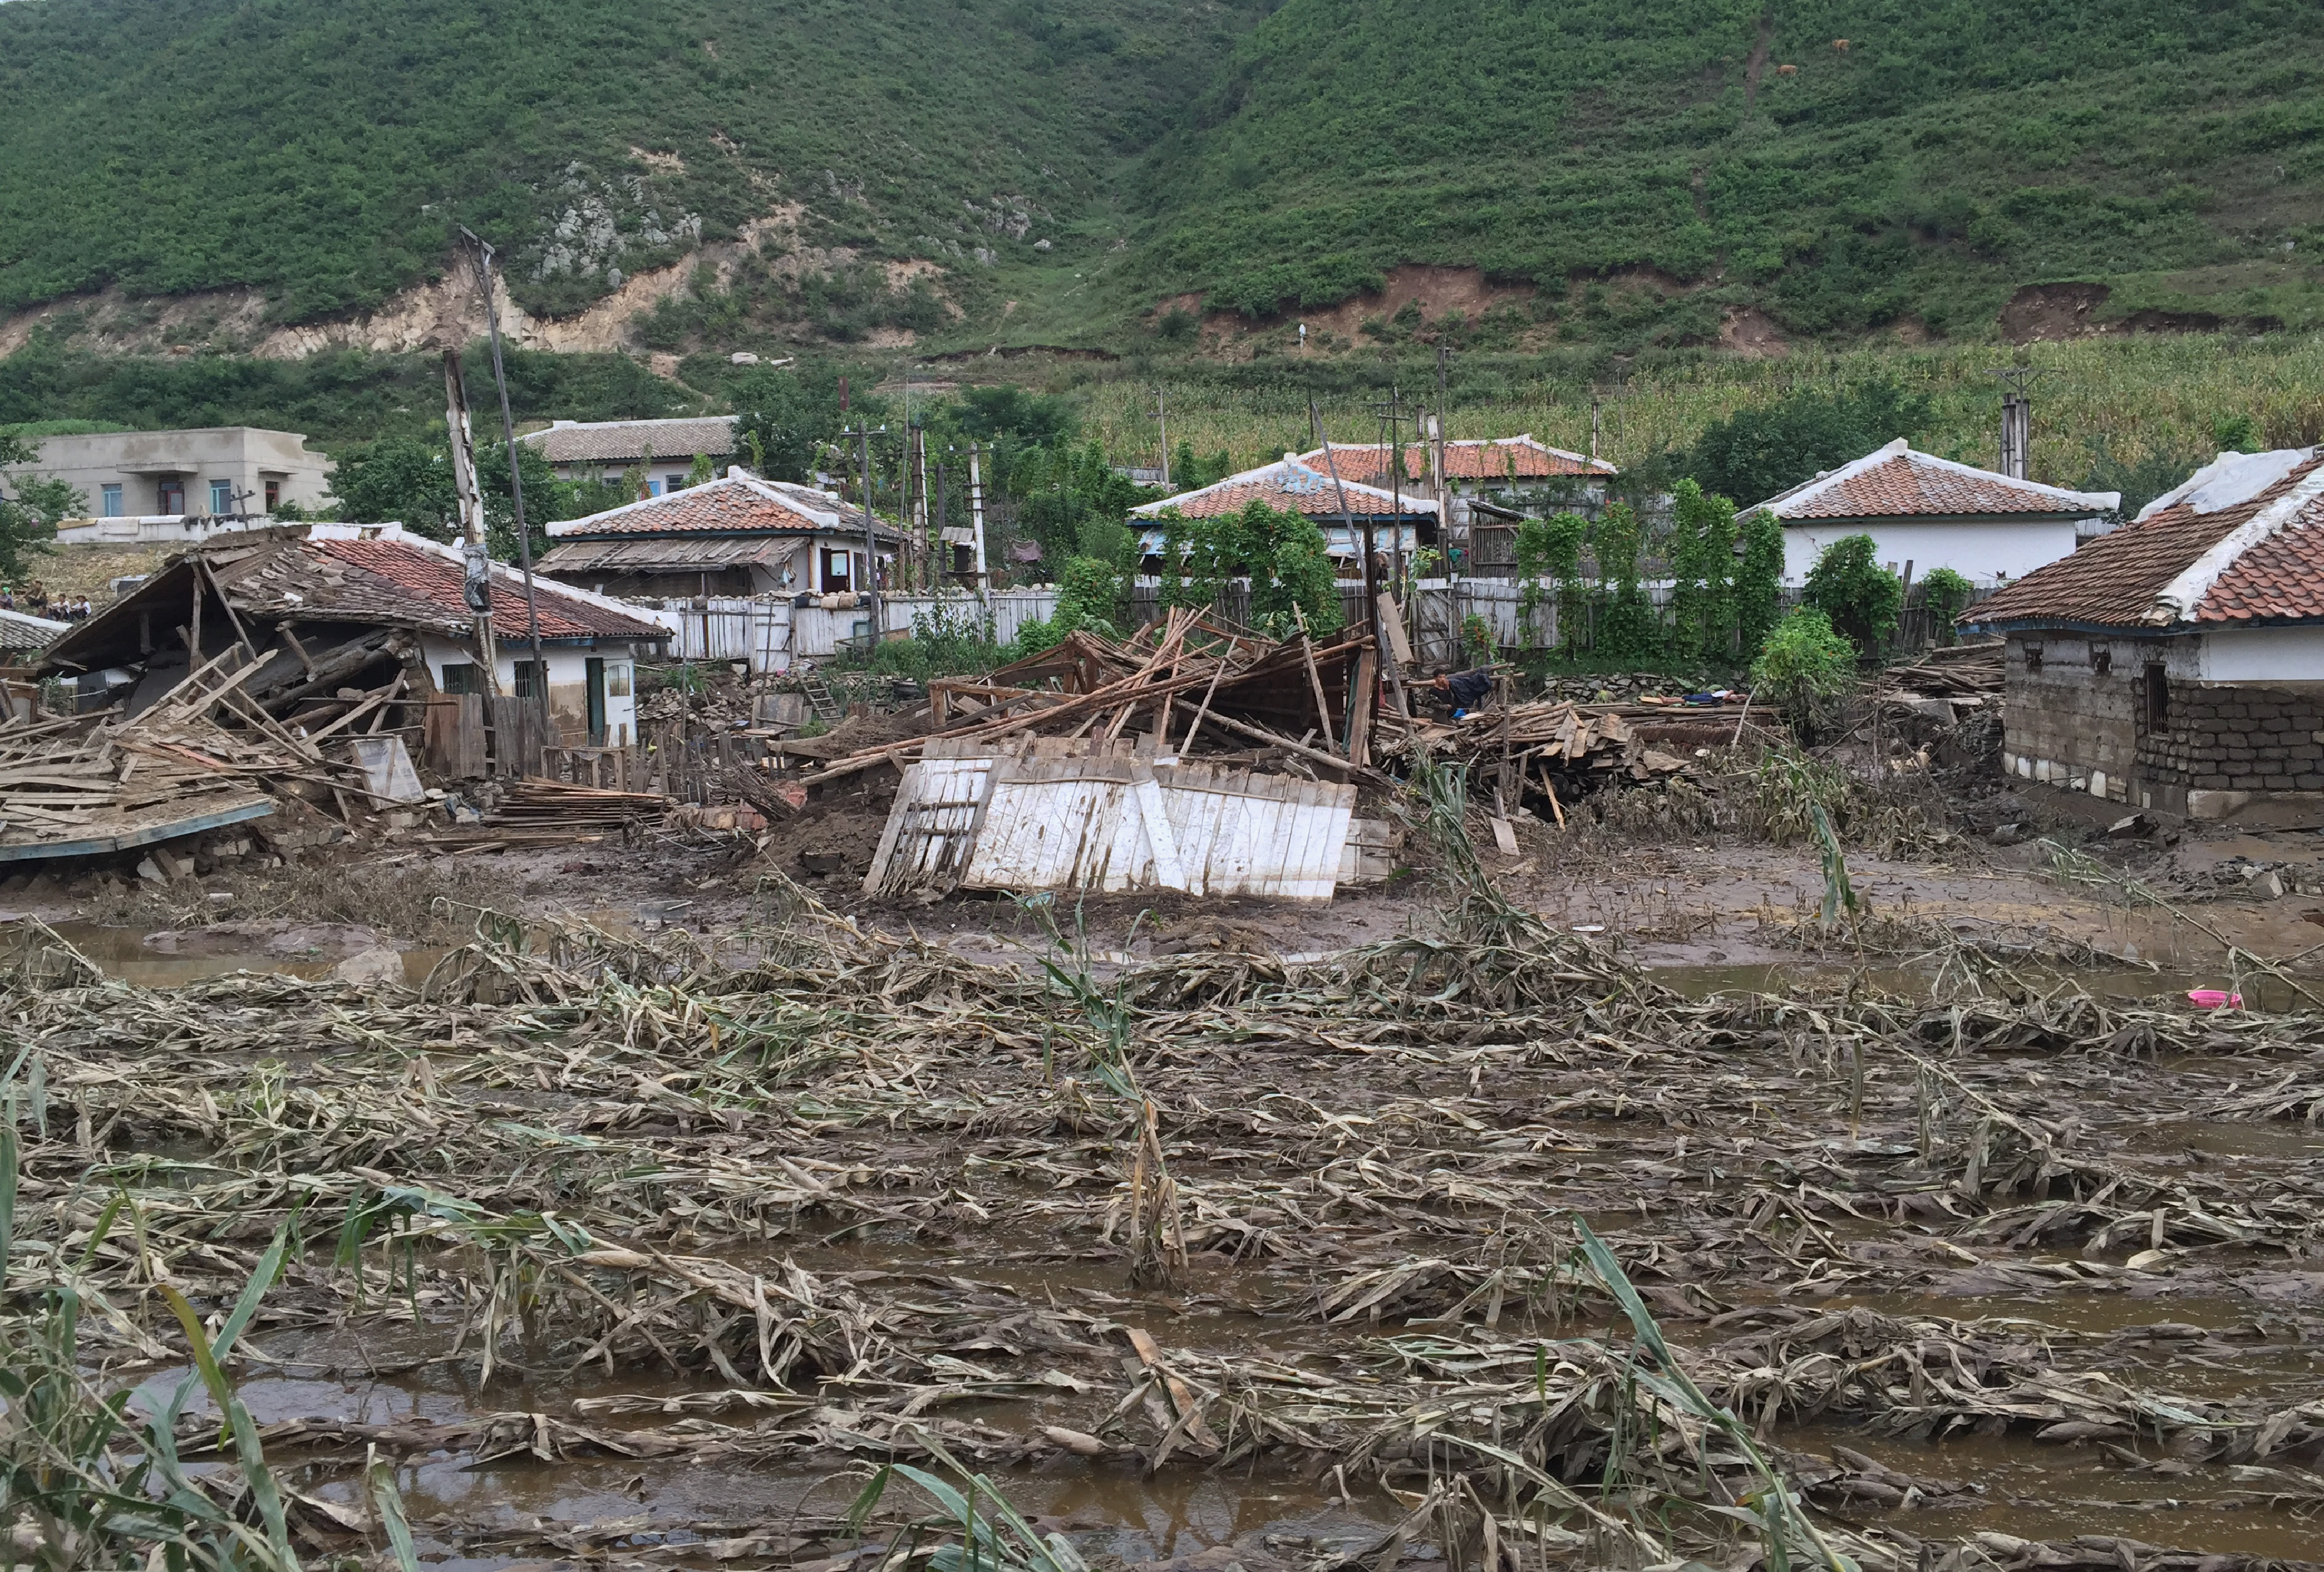 This handout photo taken on September 7, 2016 and released on September 13, 2016 by UNICEF DPRK shows the damage to crops and houses, caused by heavy flooding of the Tumen river along the road from Musan to Yonsa in Hoery?ng, North Hamyong province. Rescue workers struggled to reach North Korea's flood-ravaged communities Tuesday as the Red Cross warned of a "major and complex diaster" which has killed scores and left tens of thousands in urgent need of help. At least 133 people have been killed and hundreds more are still missing after devastating floods hit the country's north, leaving tens of thousands homeless and destitute, with the risk of disease now looming.  / AFP PHOTO / UNICEF DPRK / Murat SAHIN /  - South Korea OUT / REPUBLIC OF KOREA OUT   ---EDITORS NOTE--- RESTRICTED TO EDITORIAL USE - MANDATORY CREDIT "AFP PHOTO/UNICEF DPRK/MURAT SAHIN" - NO MARKETING NO ADVERTISING CAMPAIGNS - DISTRIBUTED AS A SERVICE TO CLIENTS THIS PICTURE WAS MADE AVAILABLE BY A THIRD PARTY. AFP CAN NOT INDEPENDENTLY VERIFY THE AUTHENTICITY, LOCATION, DATE AND CONTENT OF THIS IMAGE. THIS PHOTO IS DISTRIBUTED EXACTLY AS RECEIVED BY AFP.  /